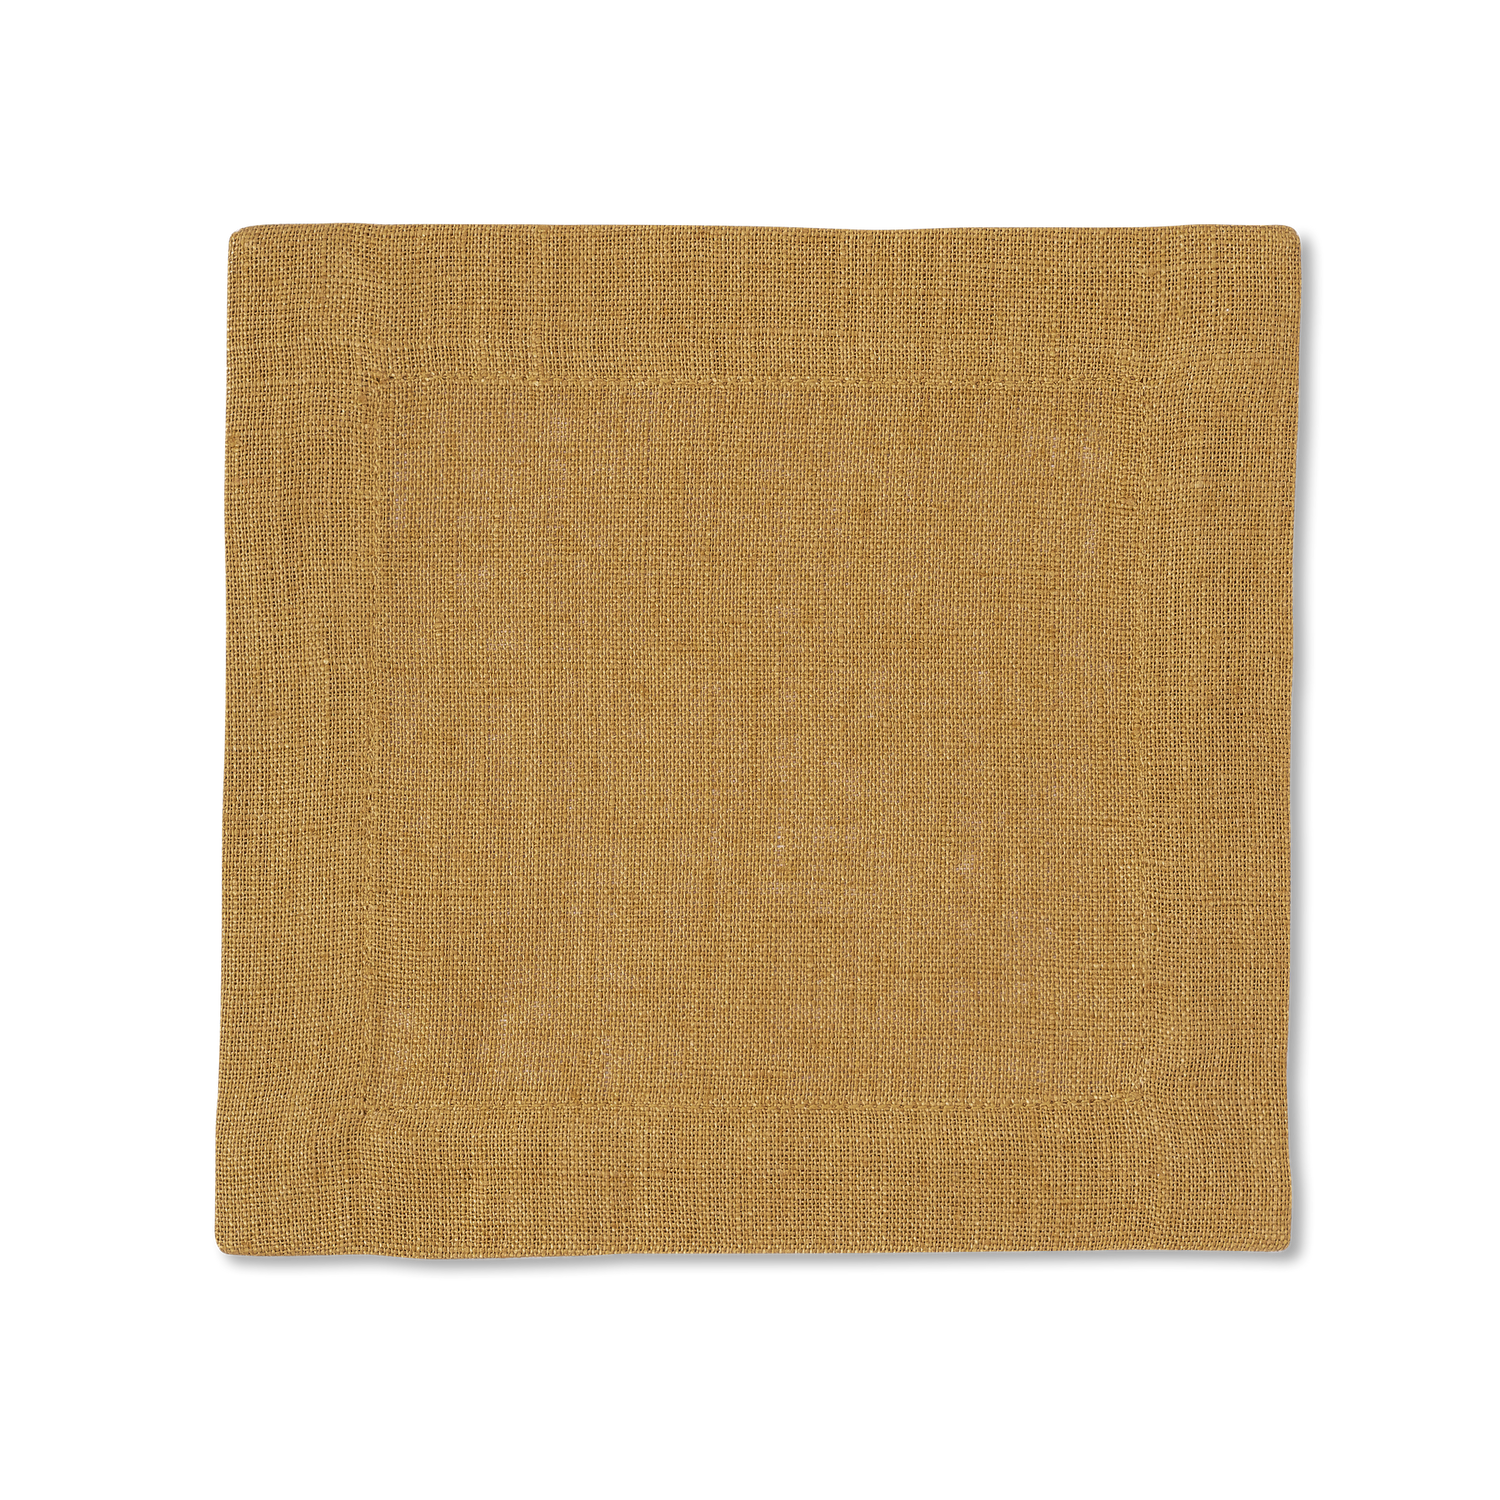 A square linen cocktail napkin in the color curry